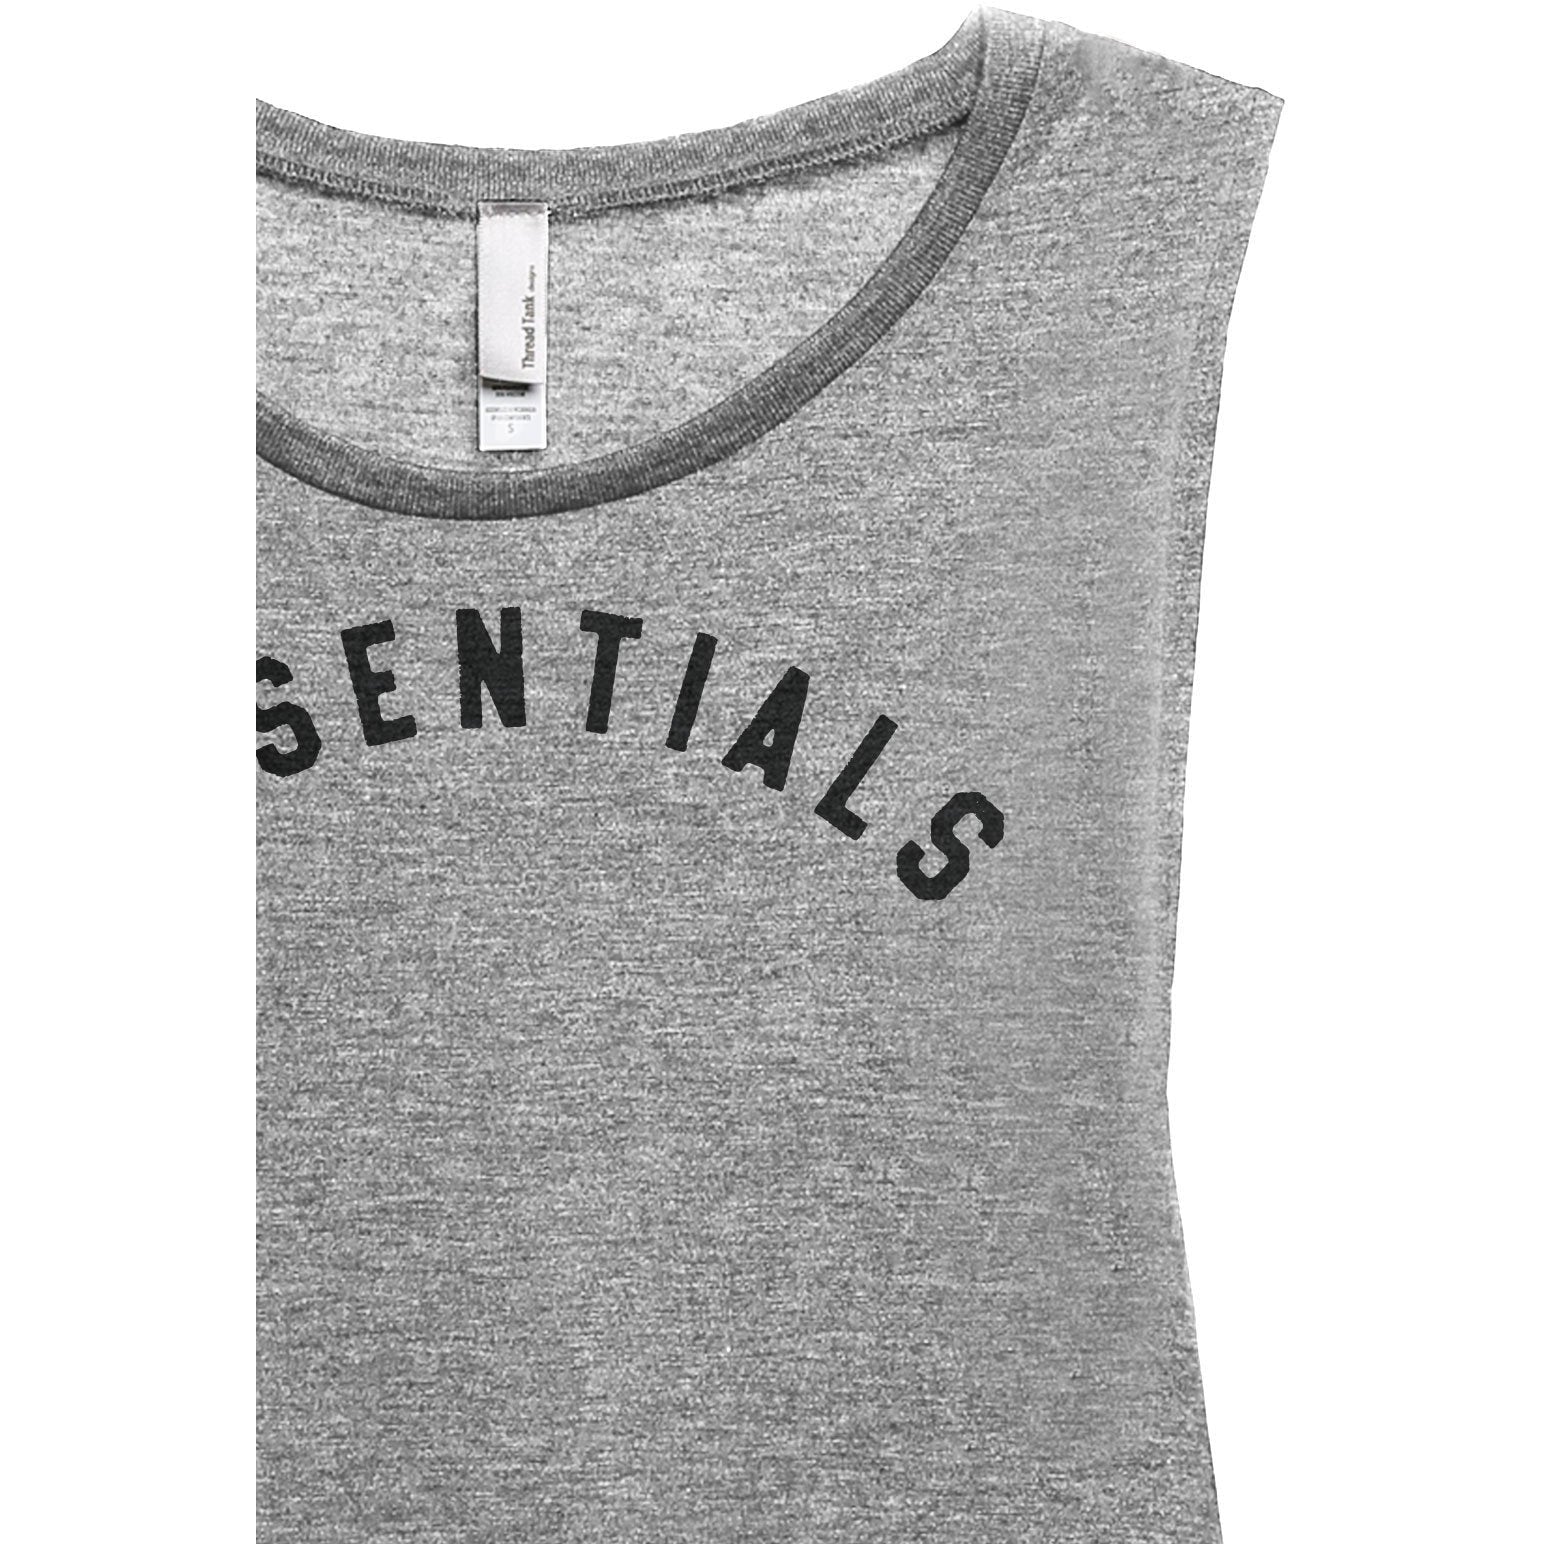 Essentials Women's Relaxed Muscle Tank Tee Heather Grey Closeup Details
